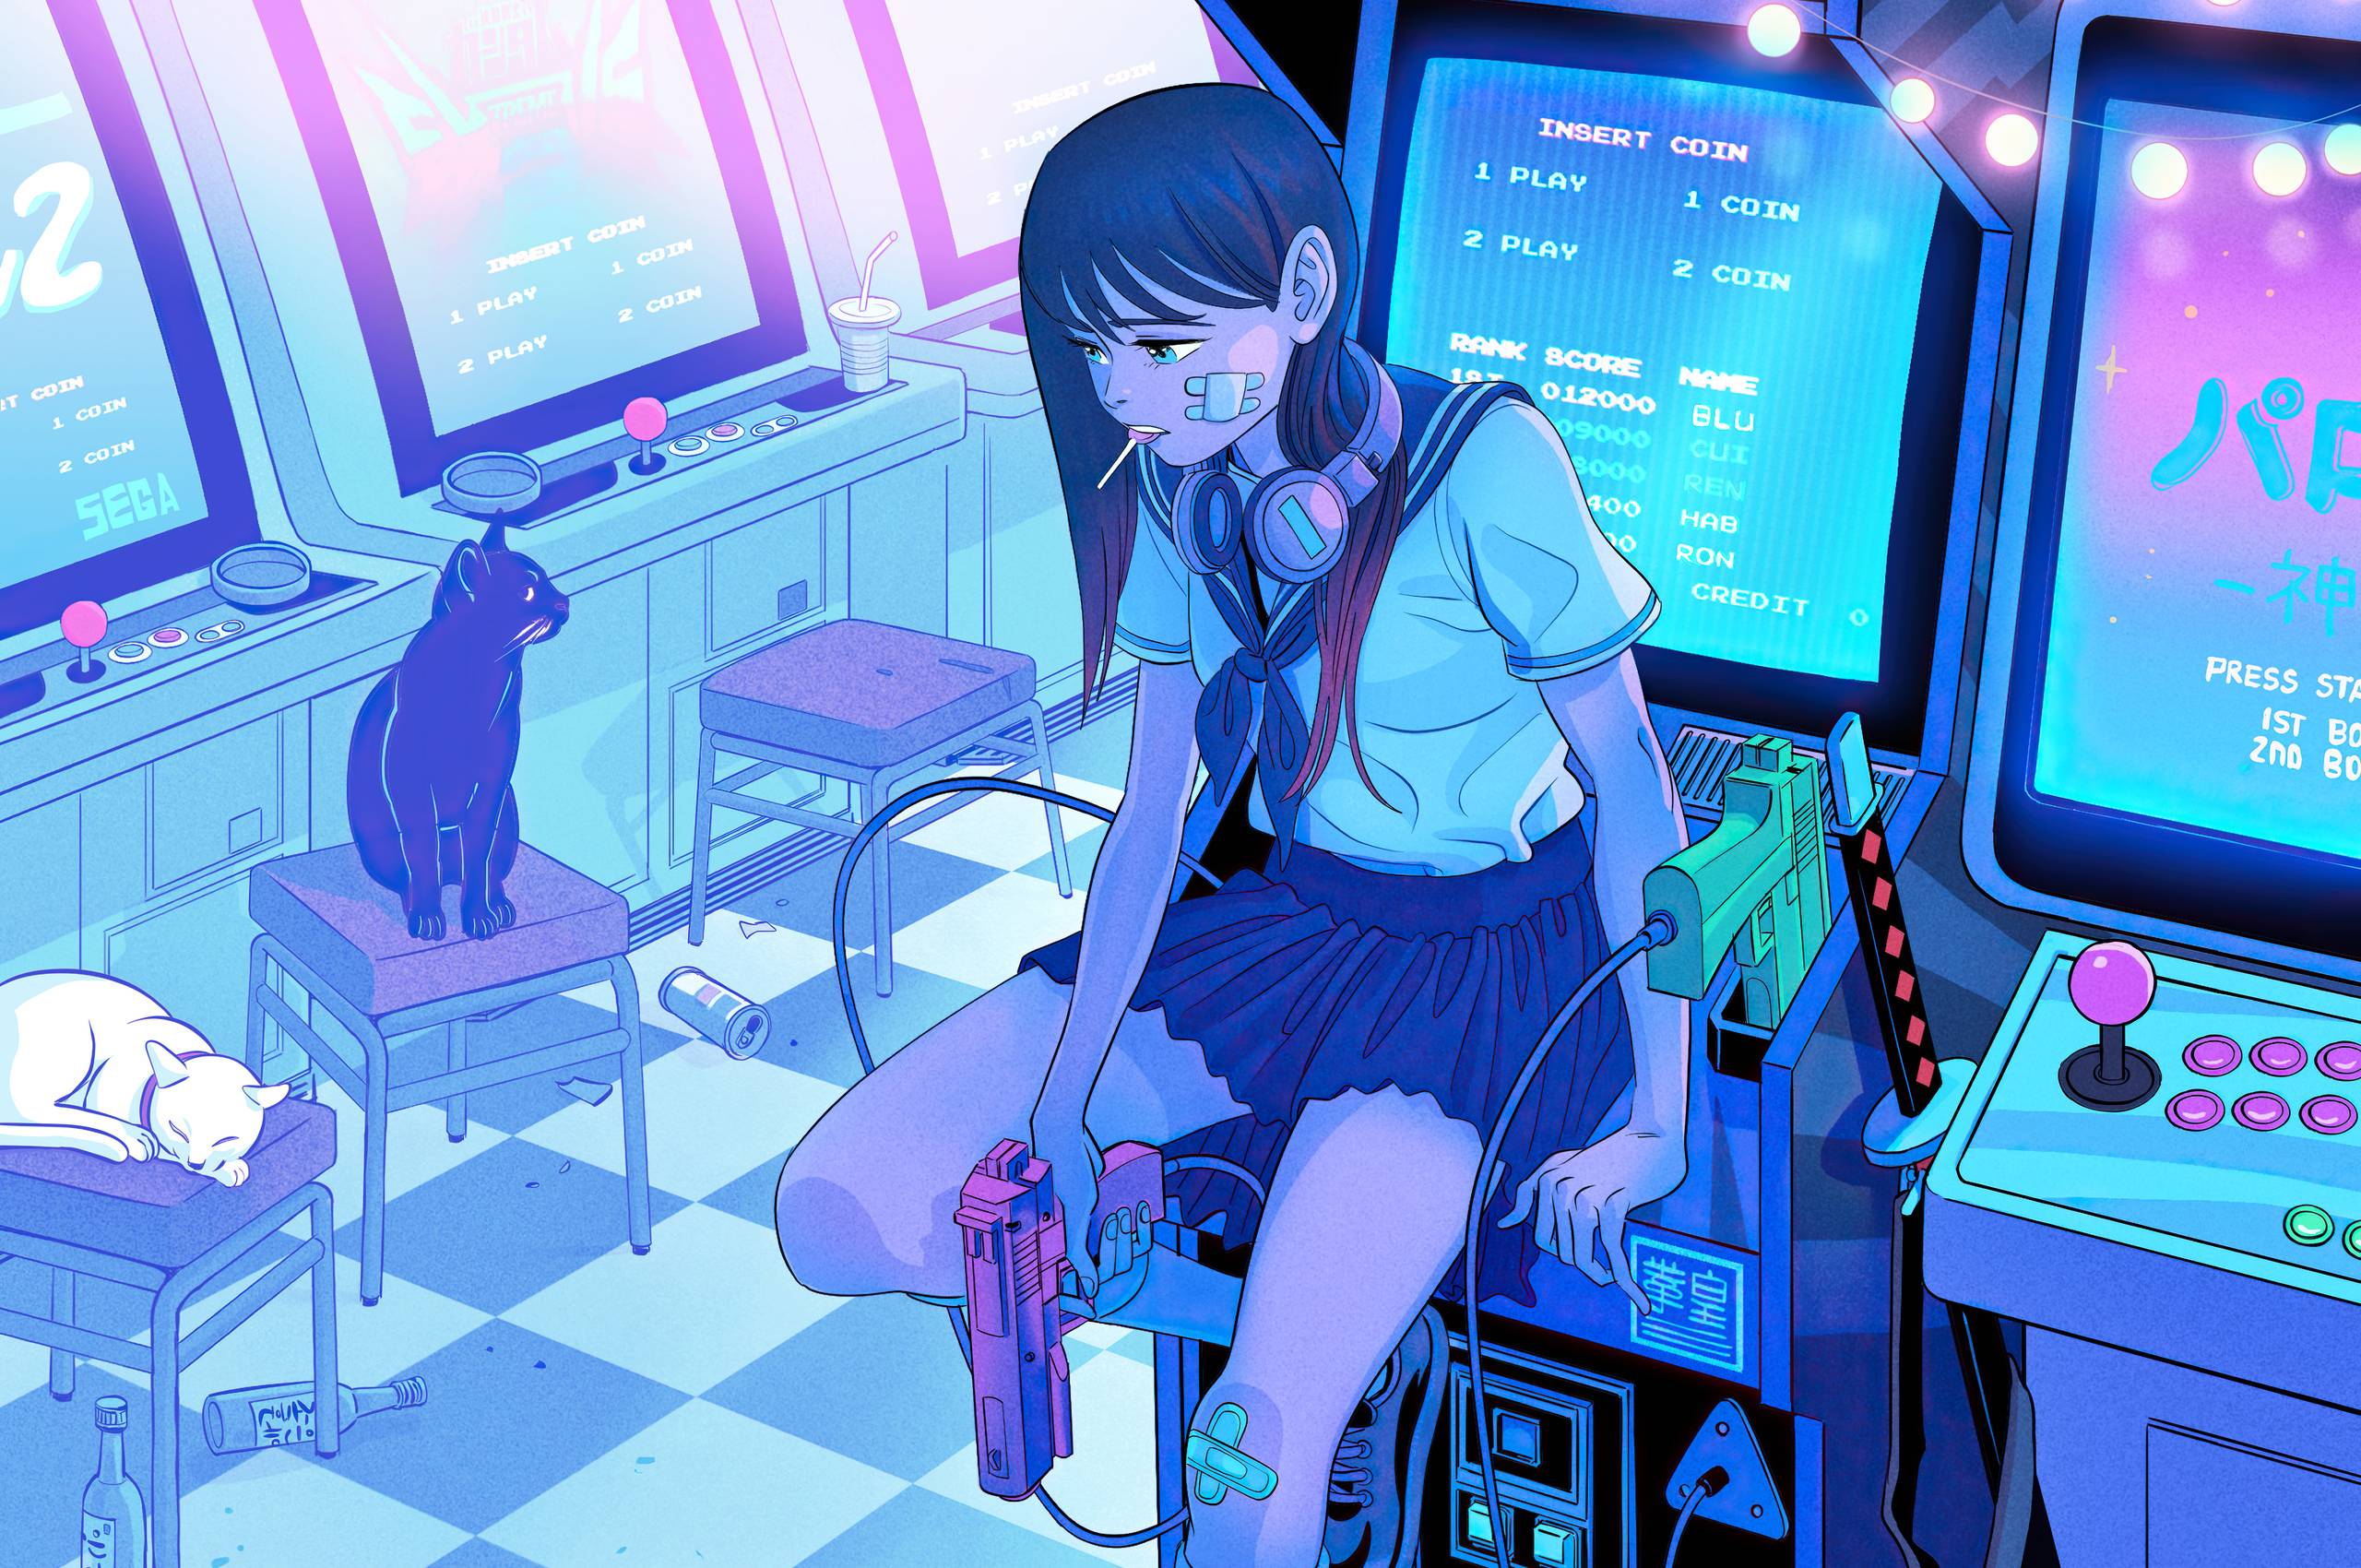 A girl sitting in front of an arcade game - Anime girl, anime, gaming